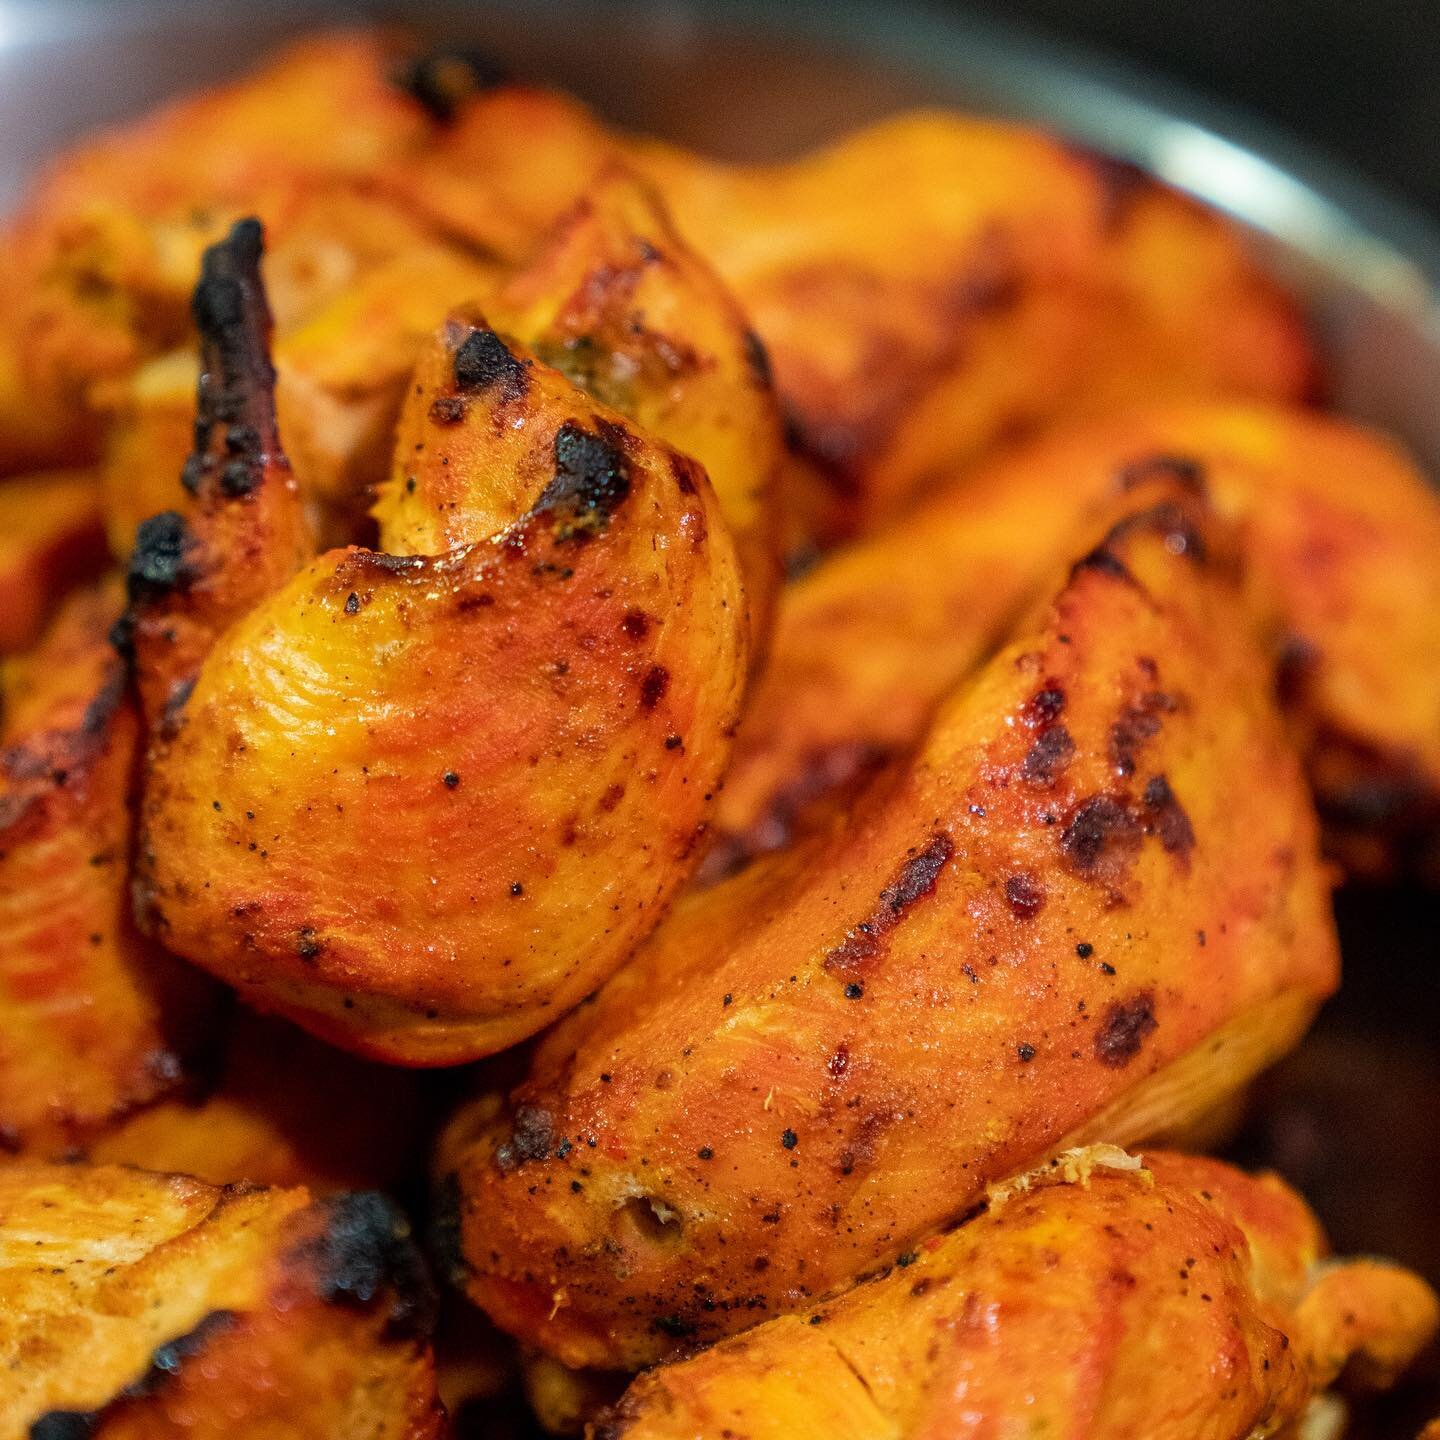 Tandoori Chicken served on a sizzling platter ❤️🔥 Chicken cooked in our traditional Tandoor with onions, bell peppers and lemon. 😍 Available at all 3 locations for patio dining or takeout! 😁 Tandoori specials, vegetarian specials, biryani dishes, 